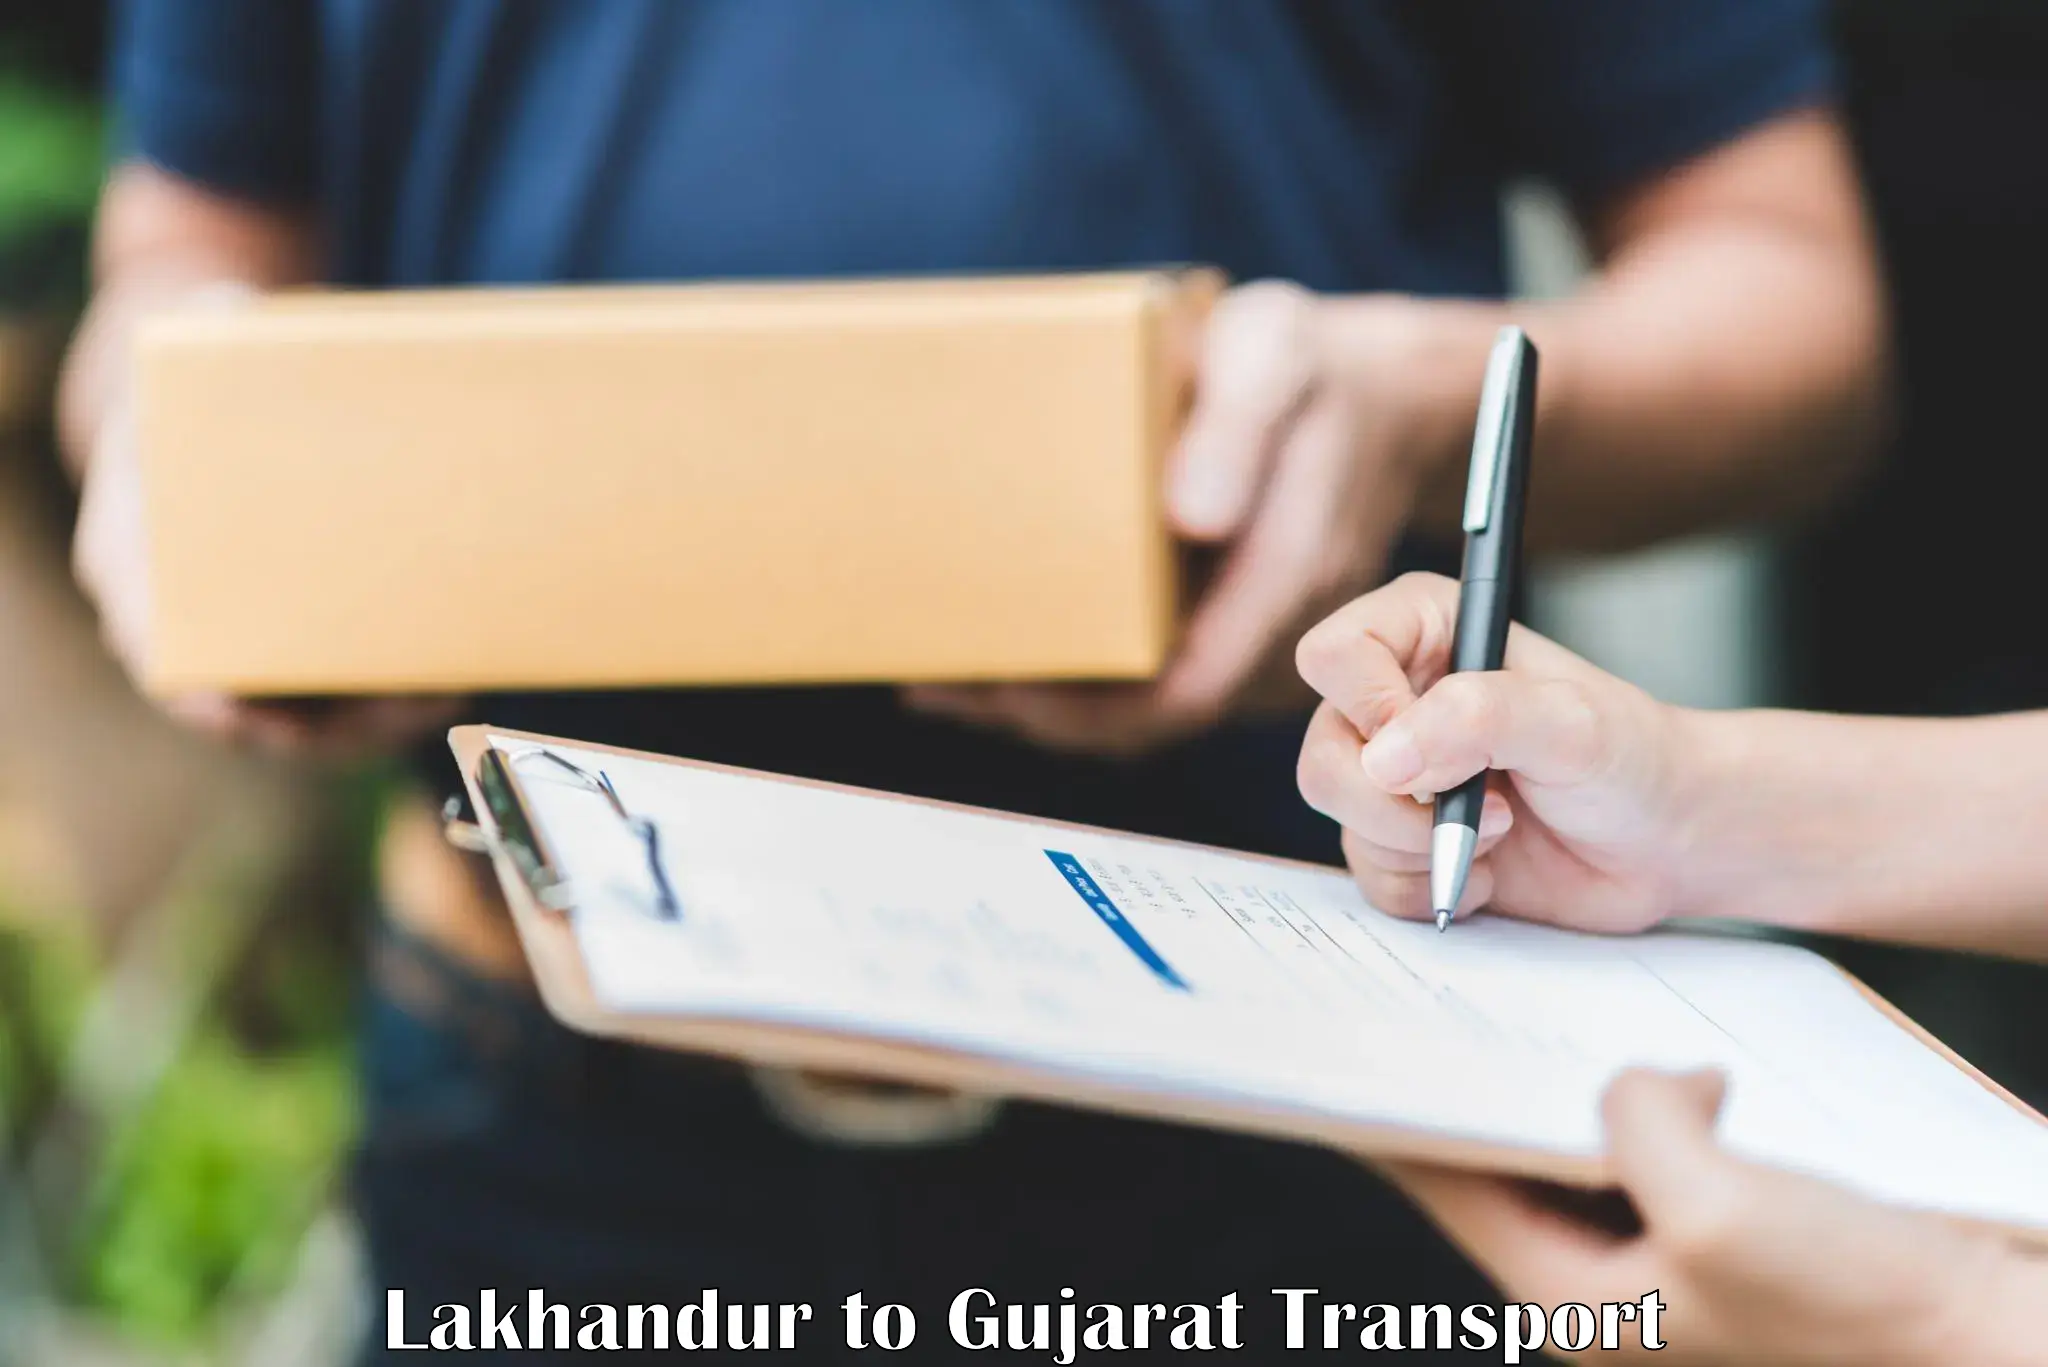 Daily transport service Lakhandur to Ahmedabad